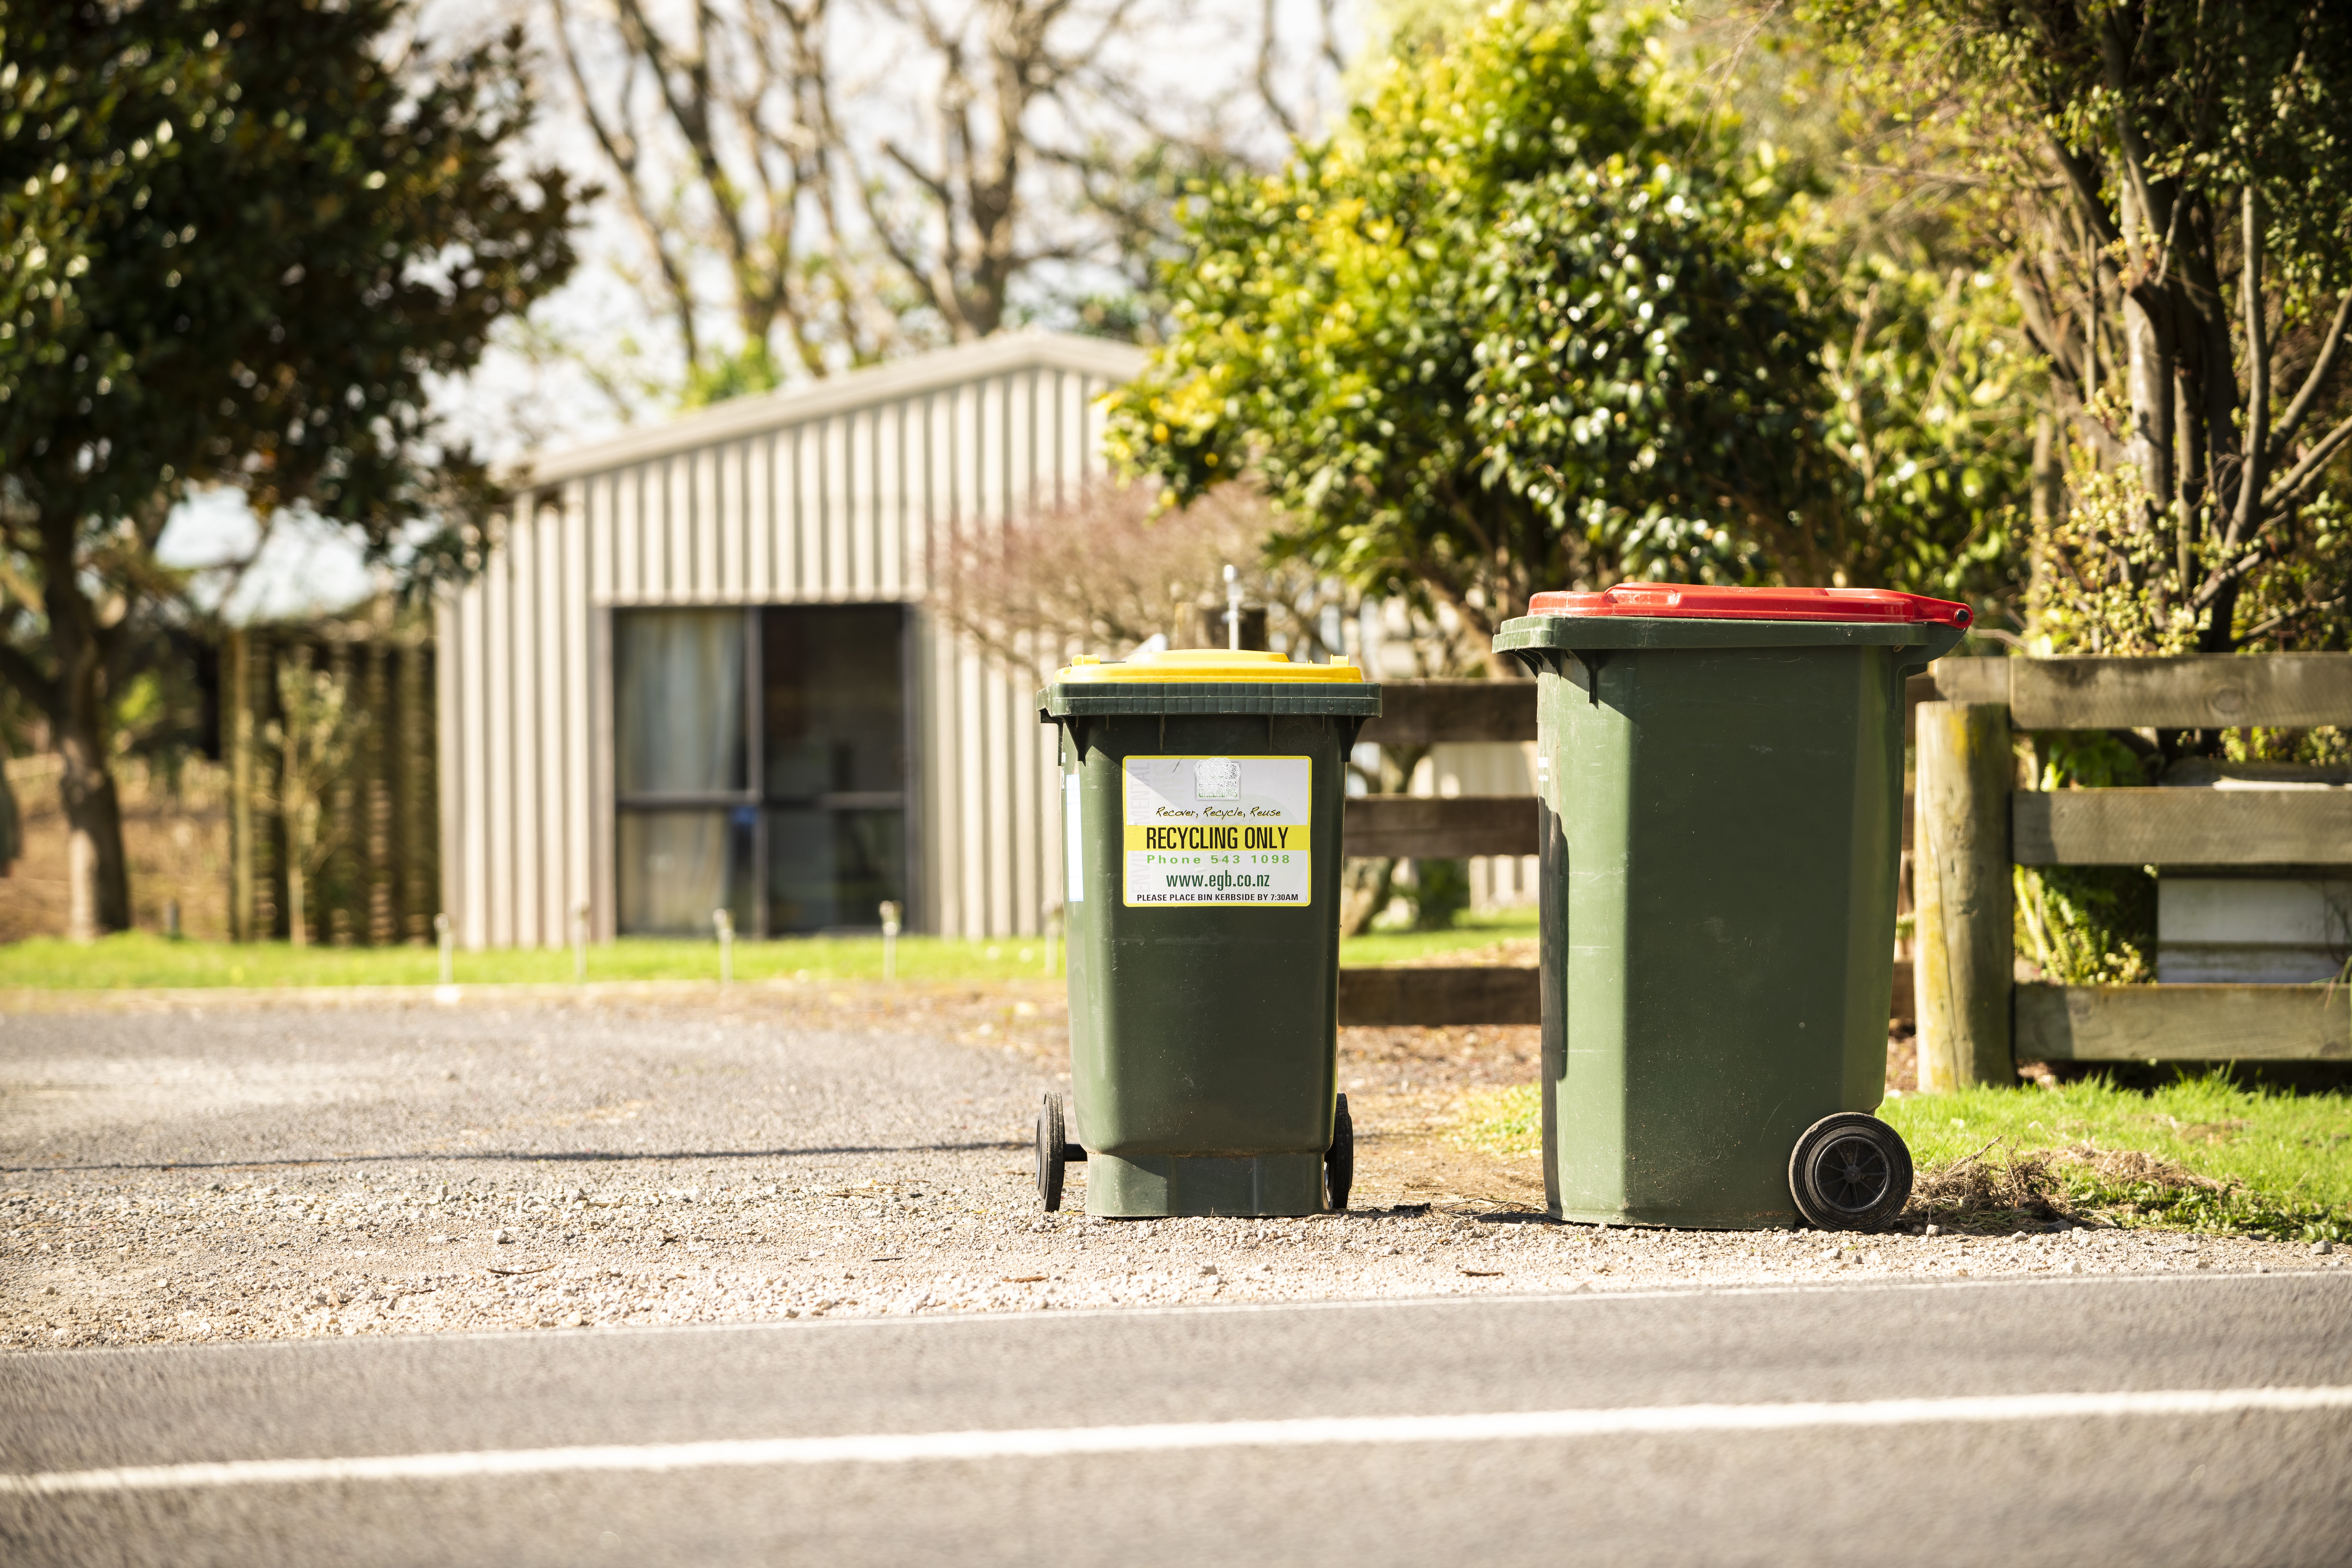 Rural residents in remote areas of the Western Bay having difficulty getting rid of their rubbish can now opt to get the private waste contractor Kleana Bins to collect direct from their property.